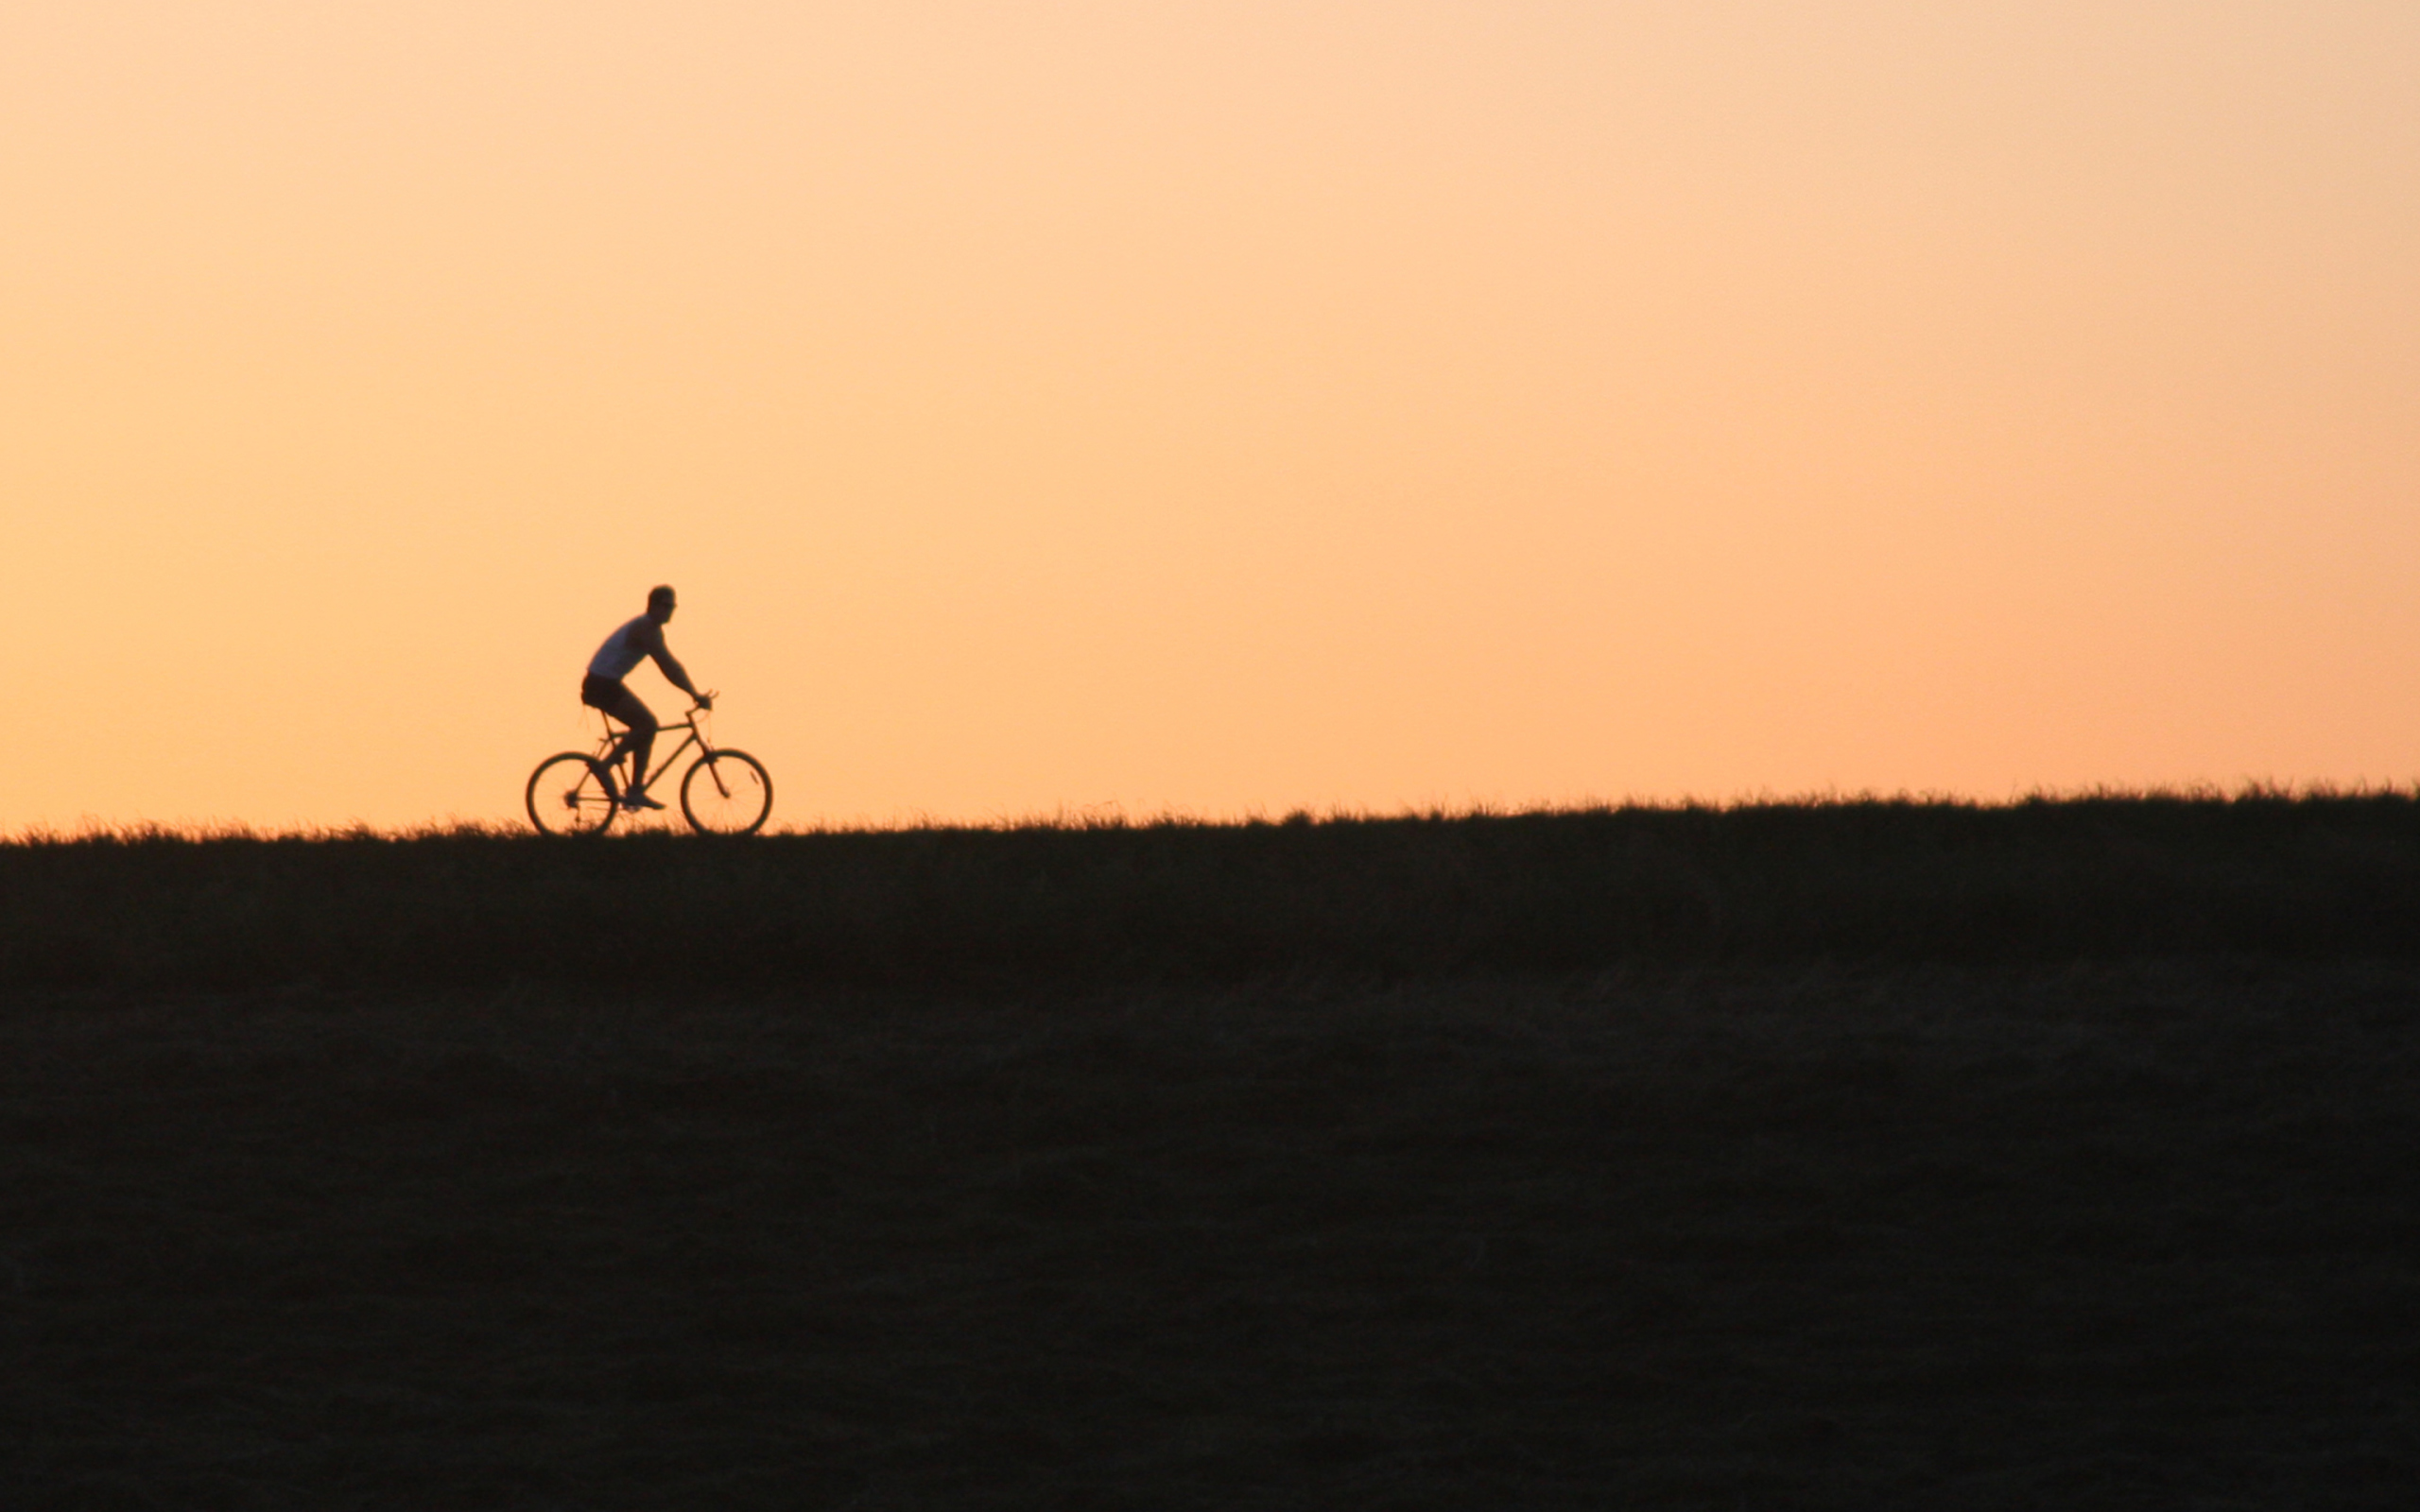 Bicycle Ride In Field wallpaper 2560x1600